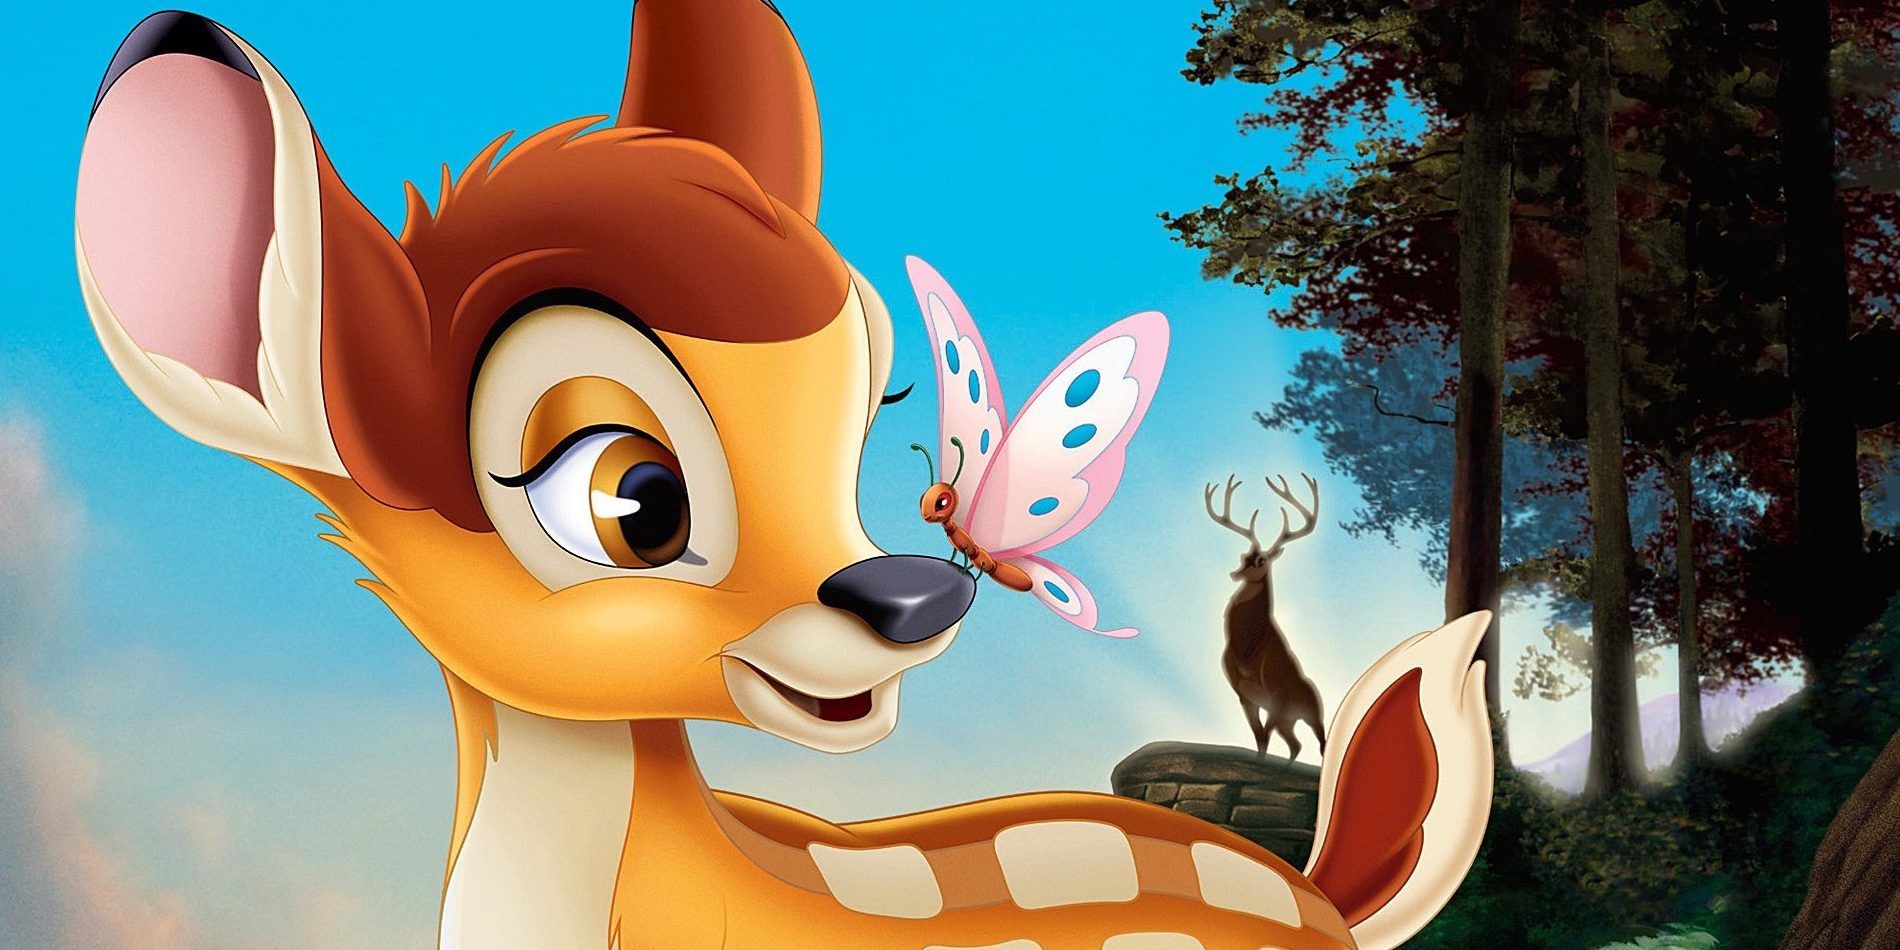 Bambi smiling with a butterfly on its nose